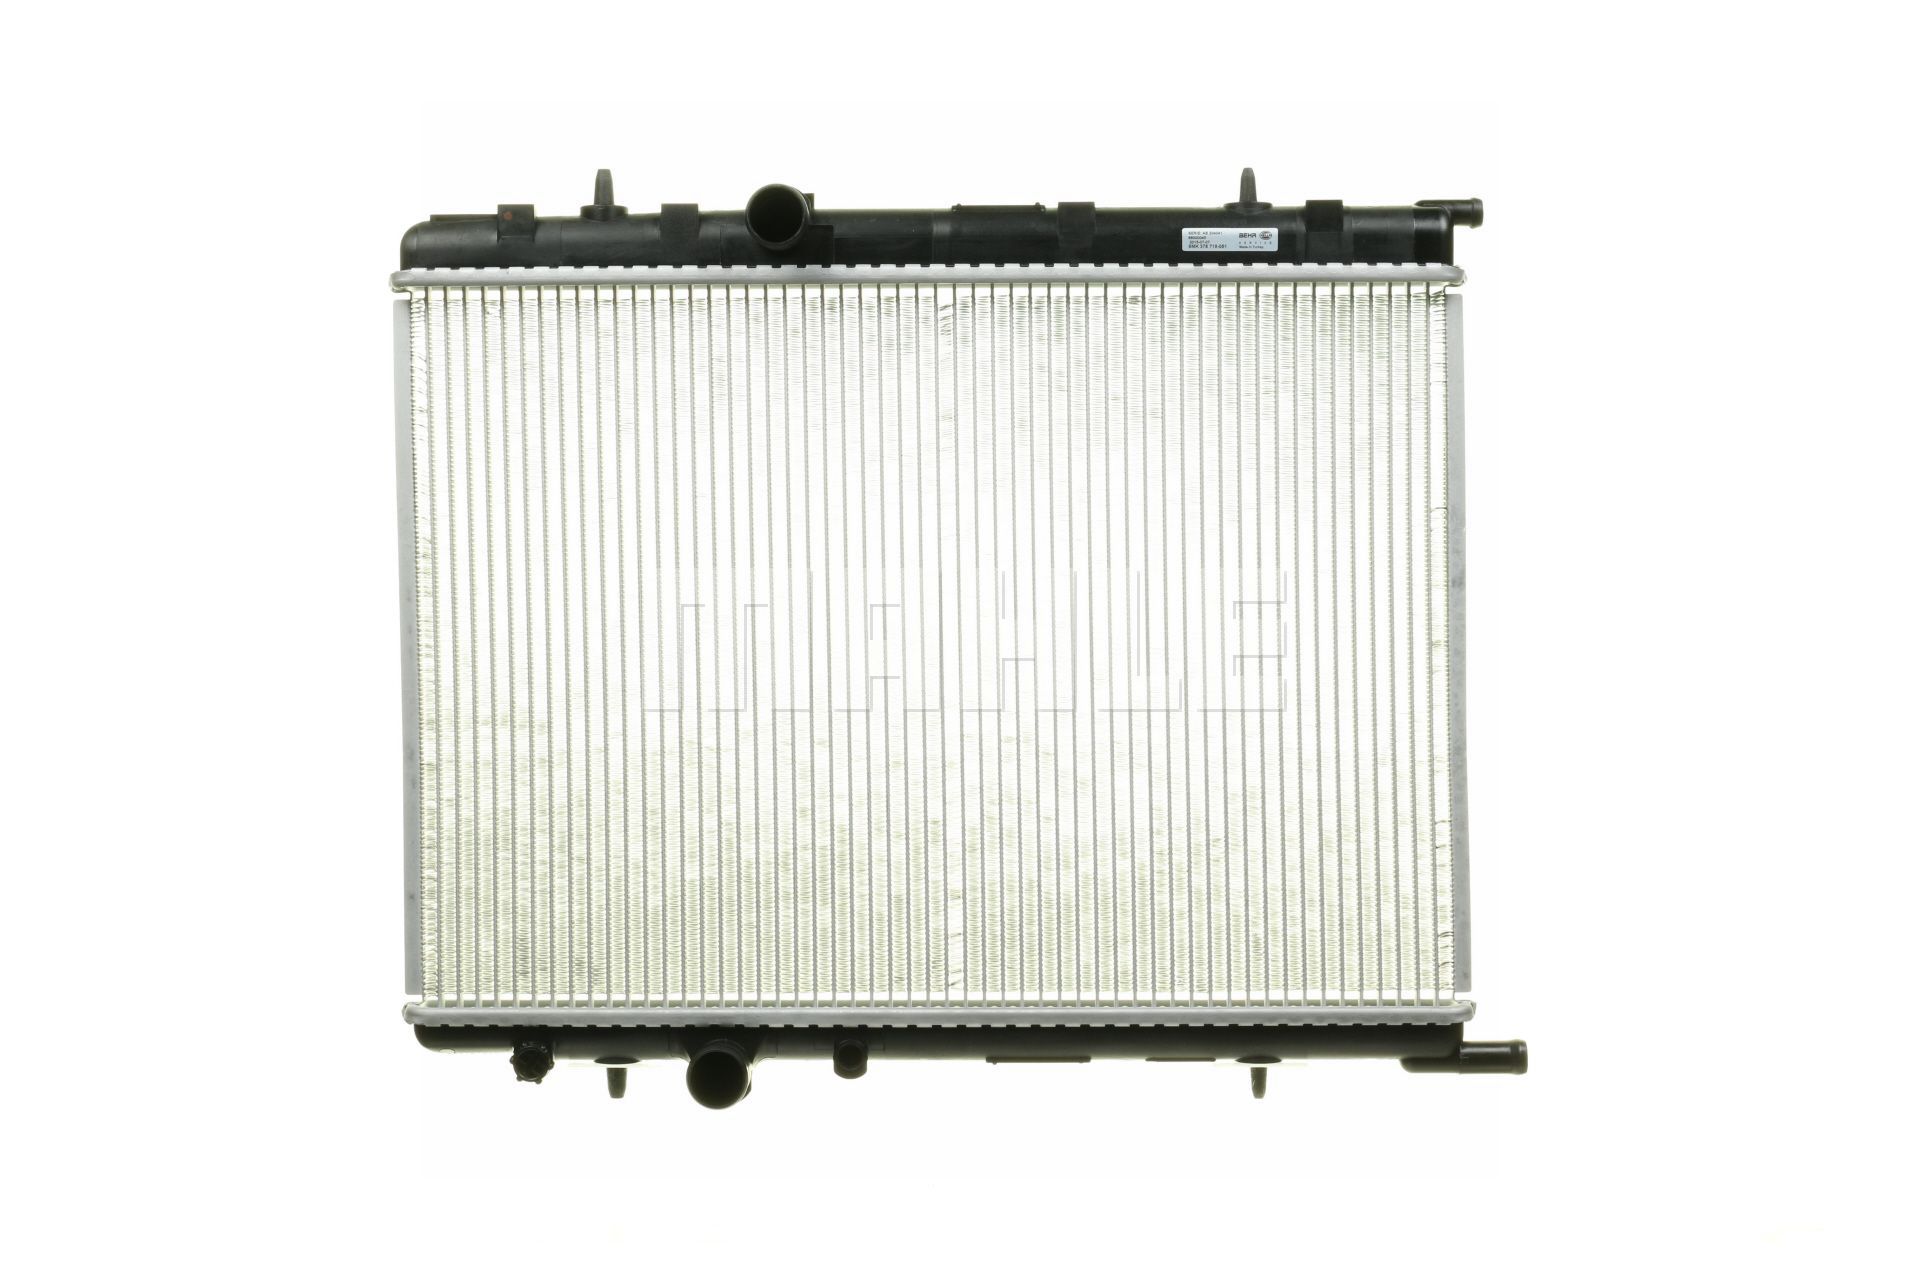 MAHLE ORIGINAL CR 515 000P Engine radiator for vehicles with/without air conditioning, 545 x 380 x 18 mm, Manual Transmission, Brazed cooling fins